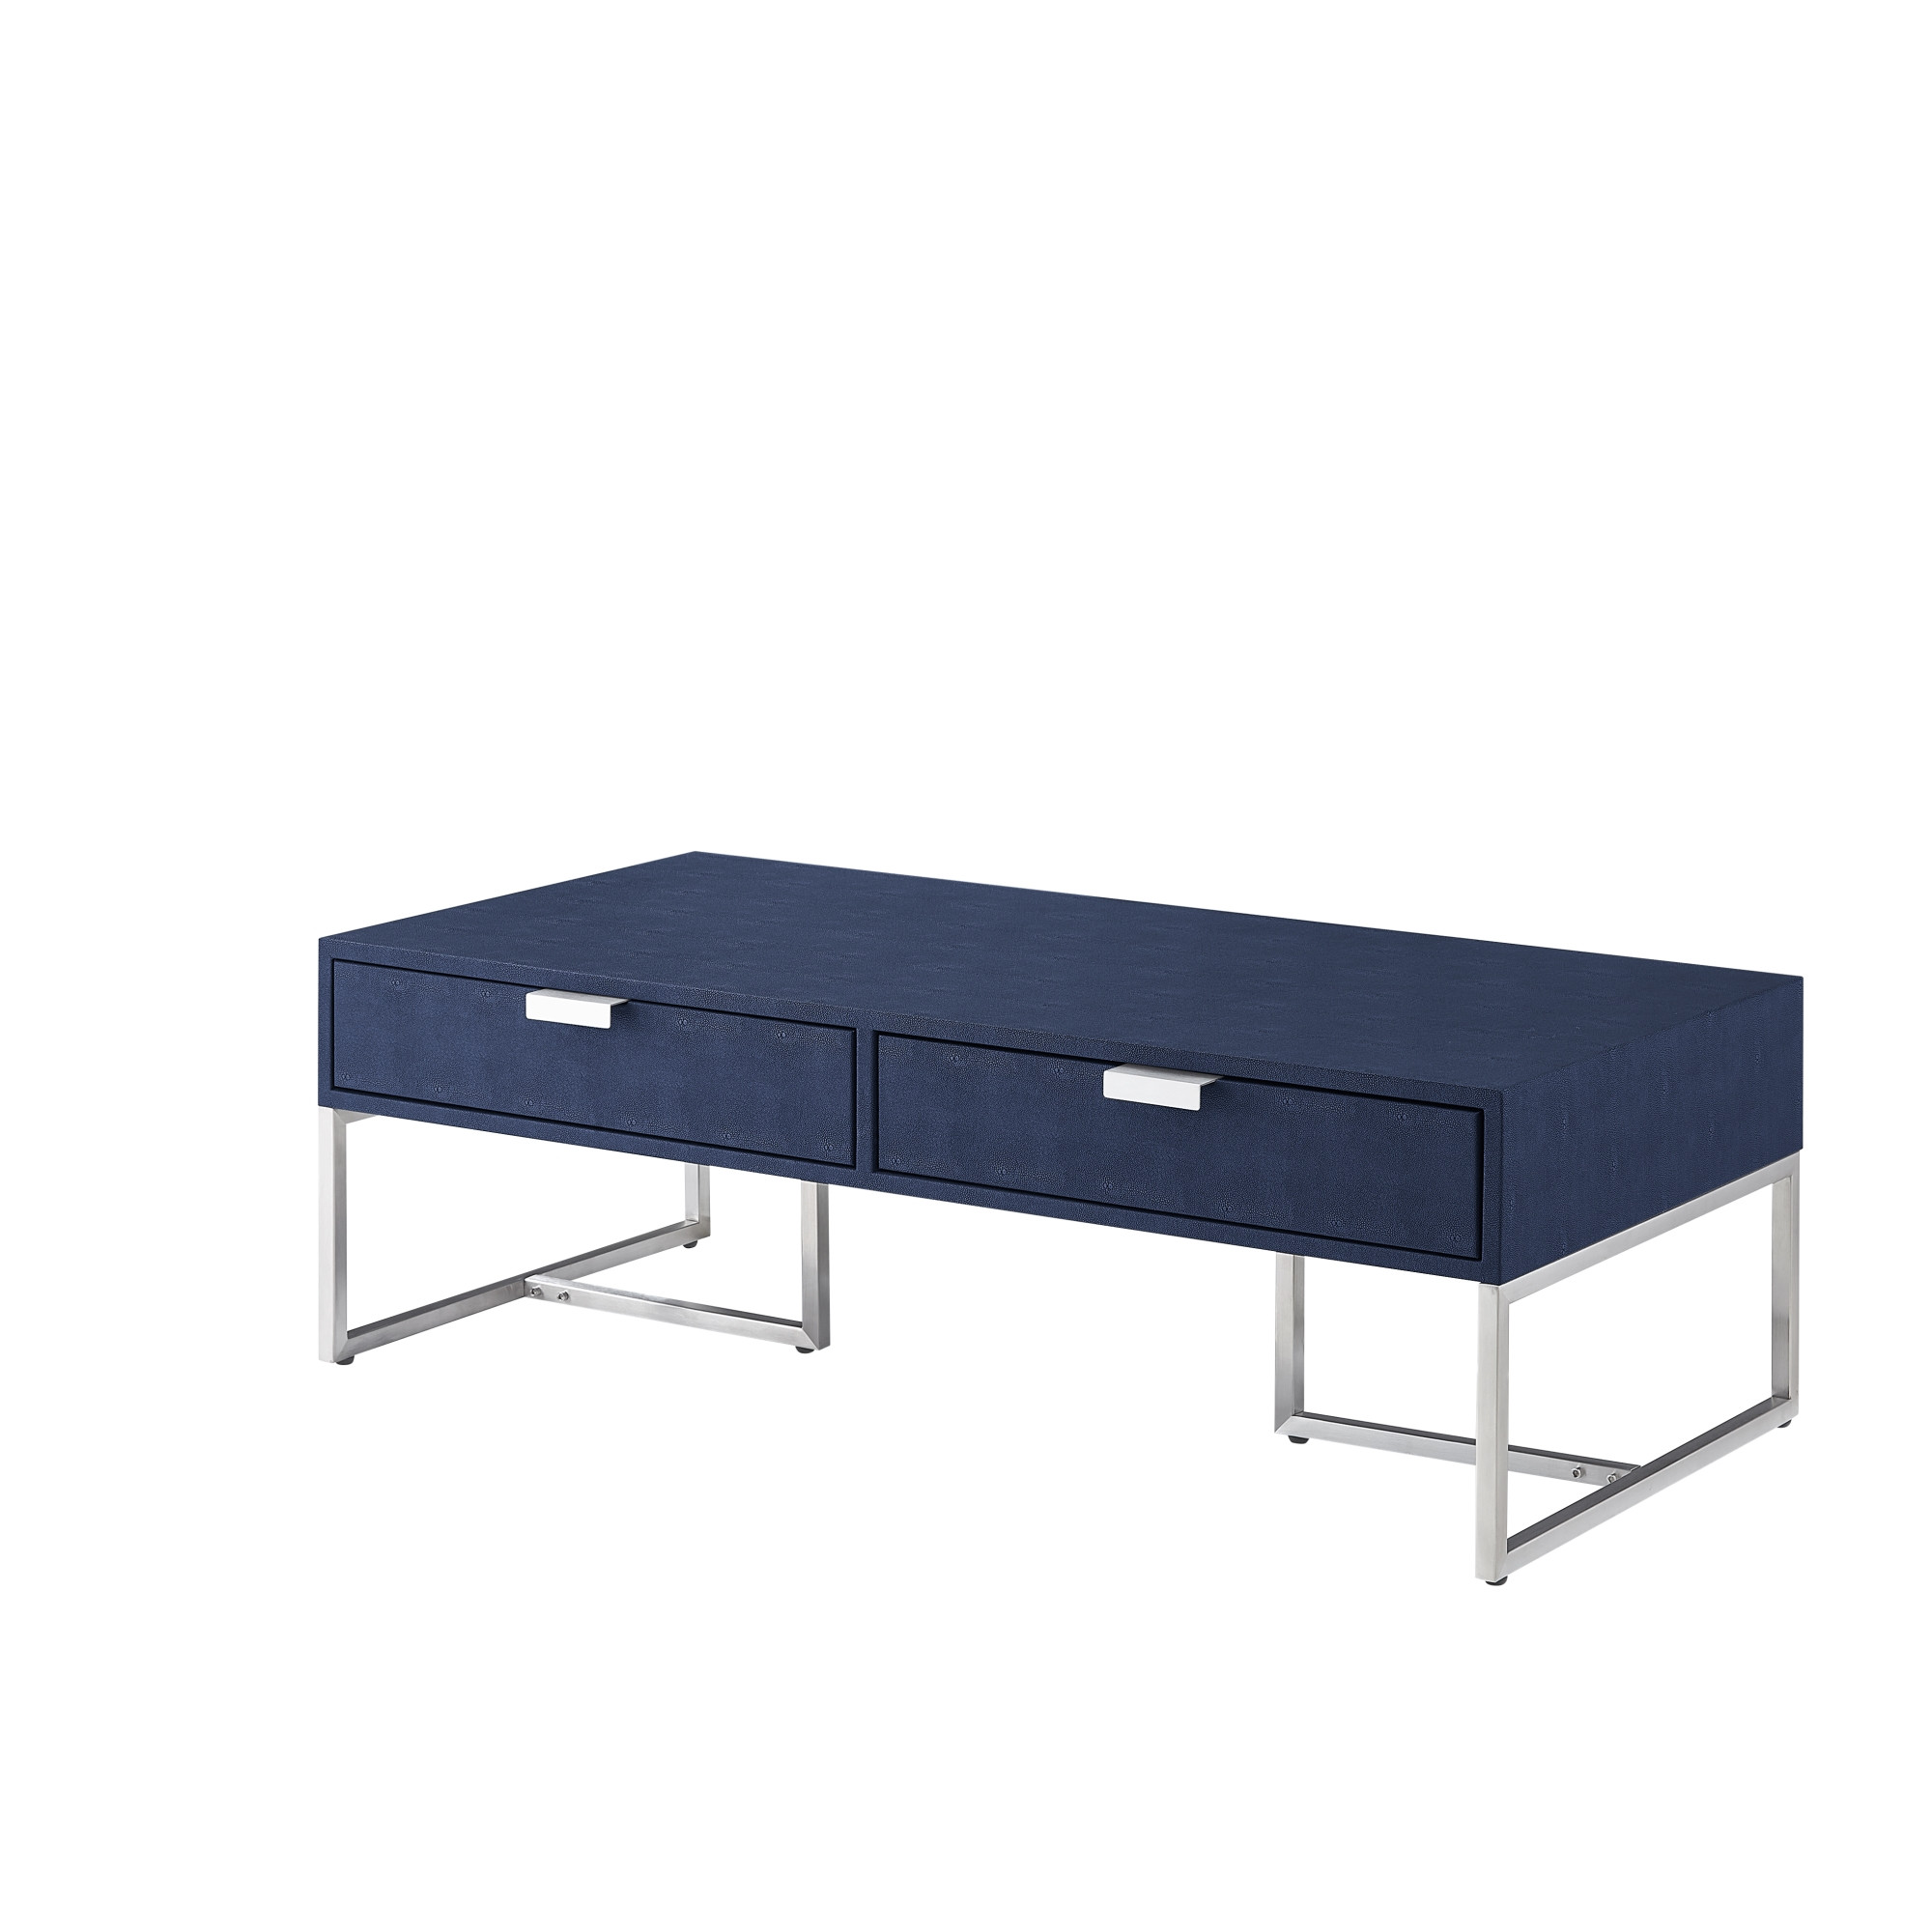 46" Navy Blue And Silver Metallic Stainless Steel Coffee Table With Two Drawers-543873-1